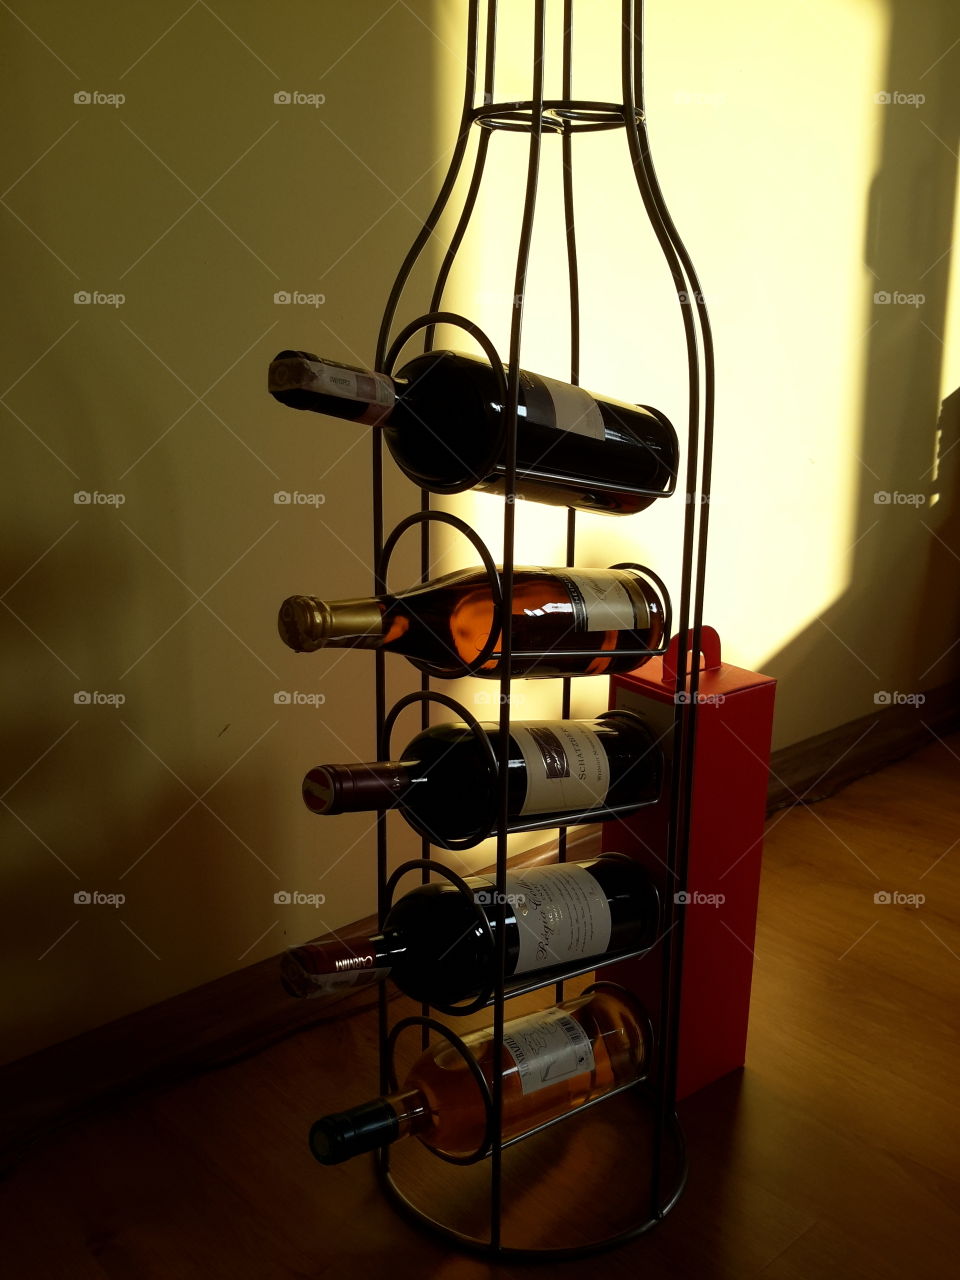 Wine collection